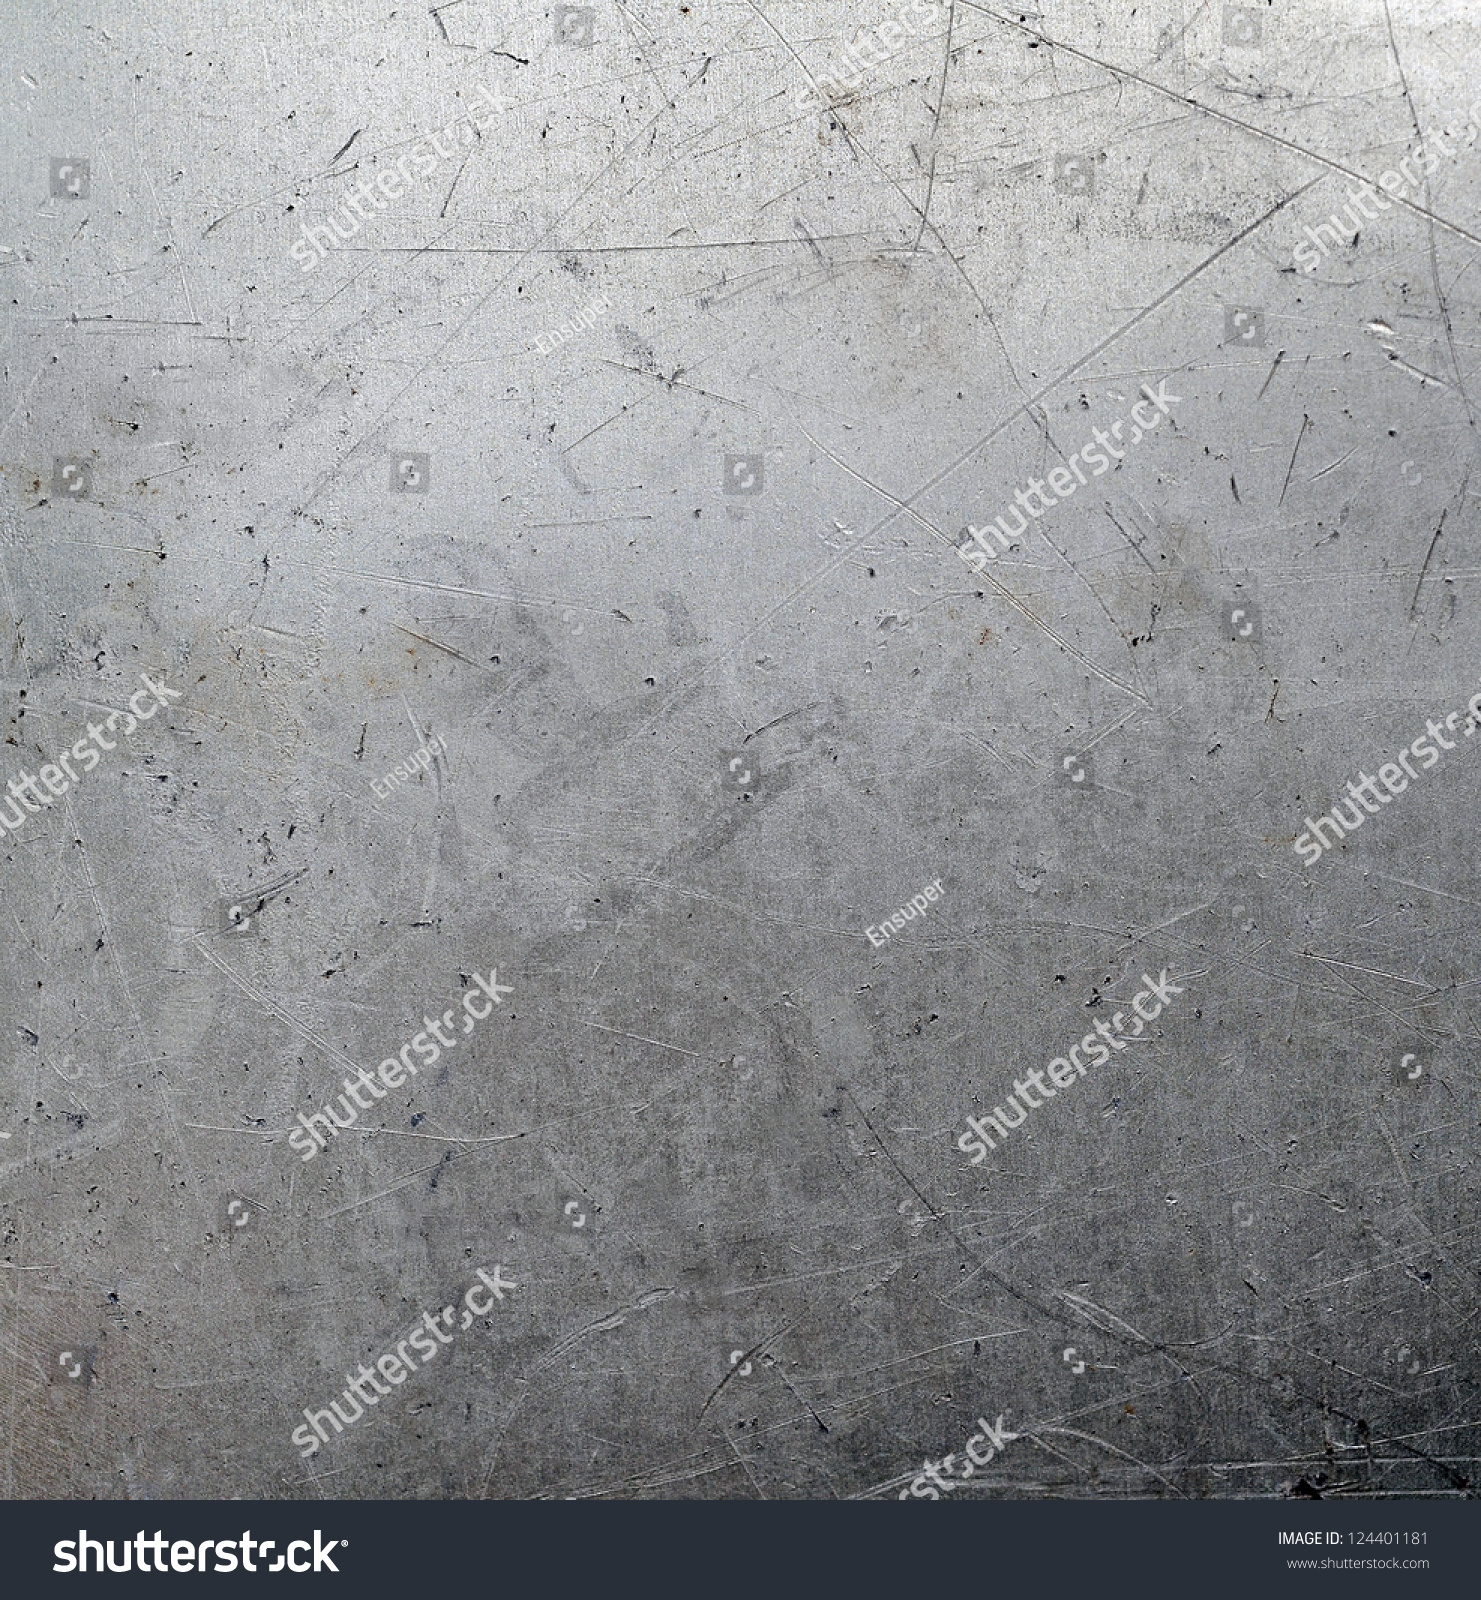 Scratched Metal Surface Stock Photo 124401181 - Shutterstock